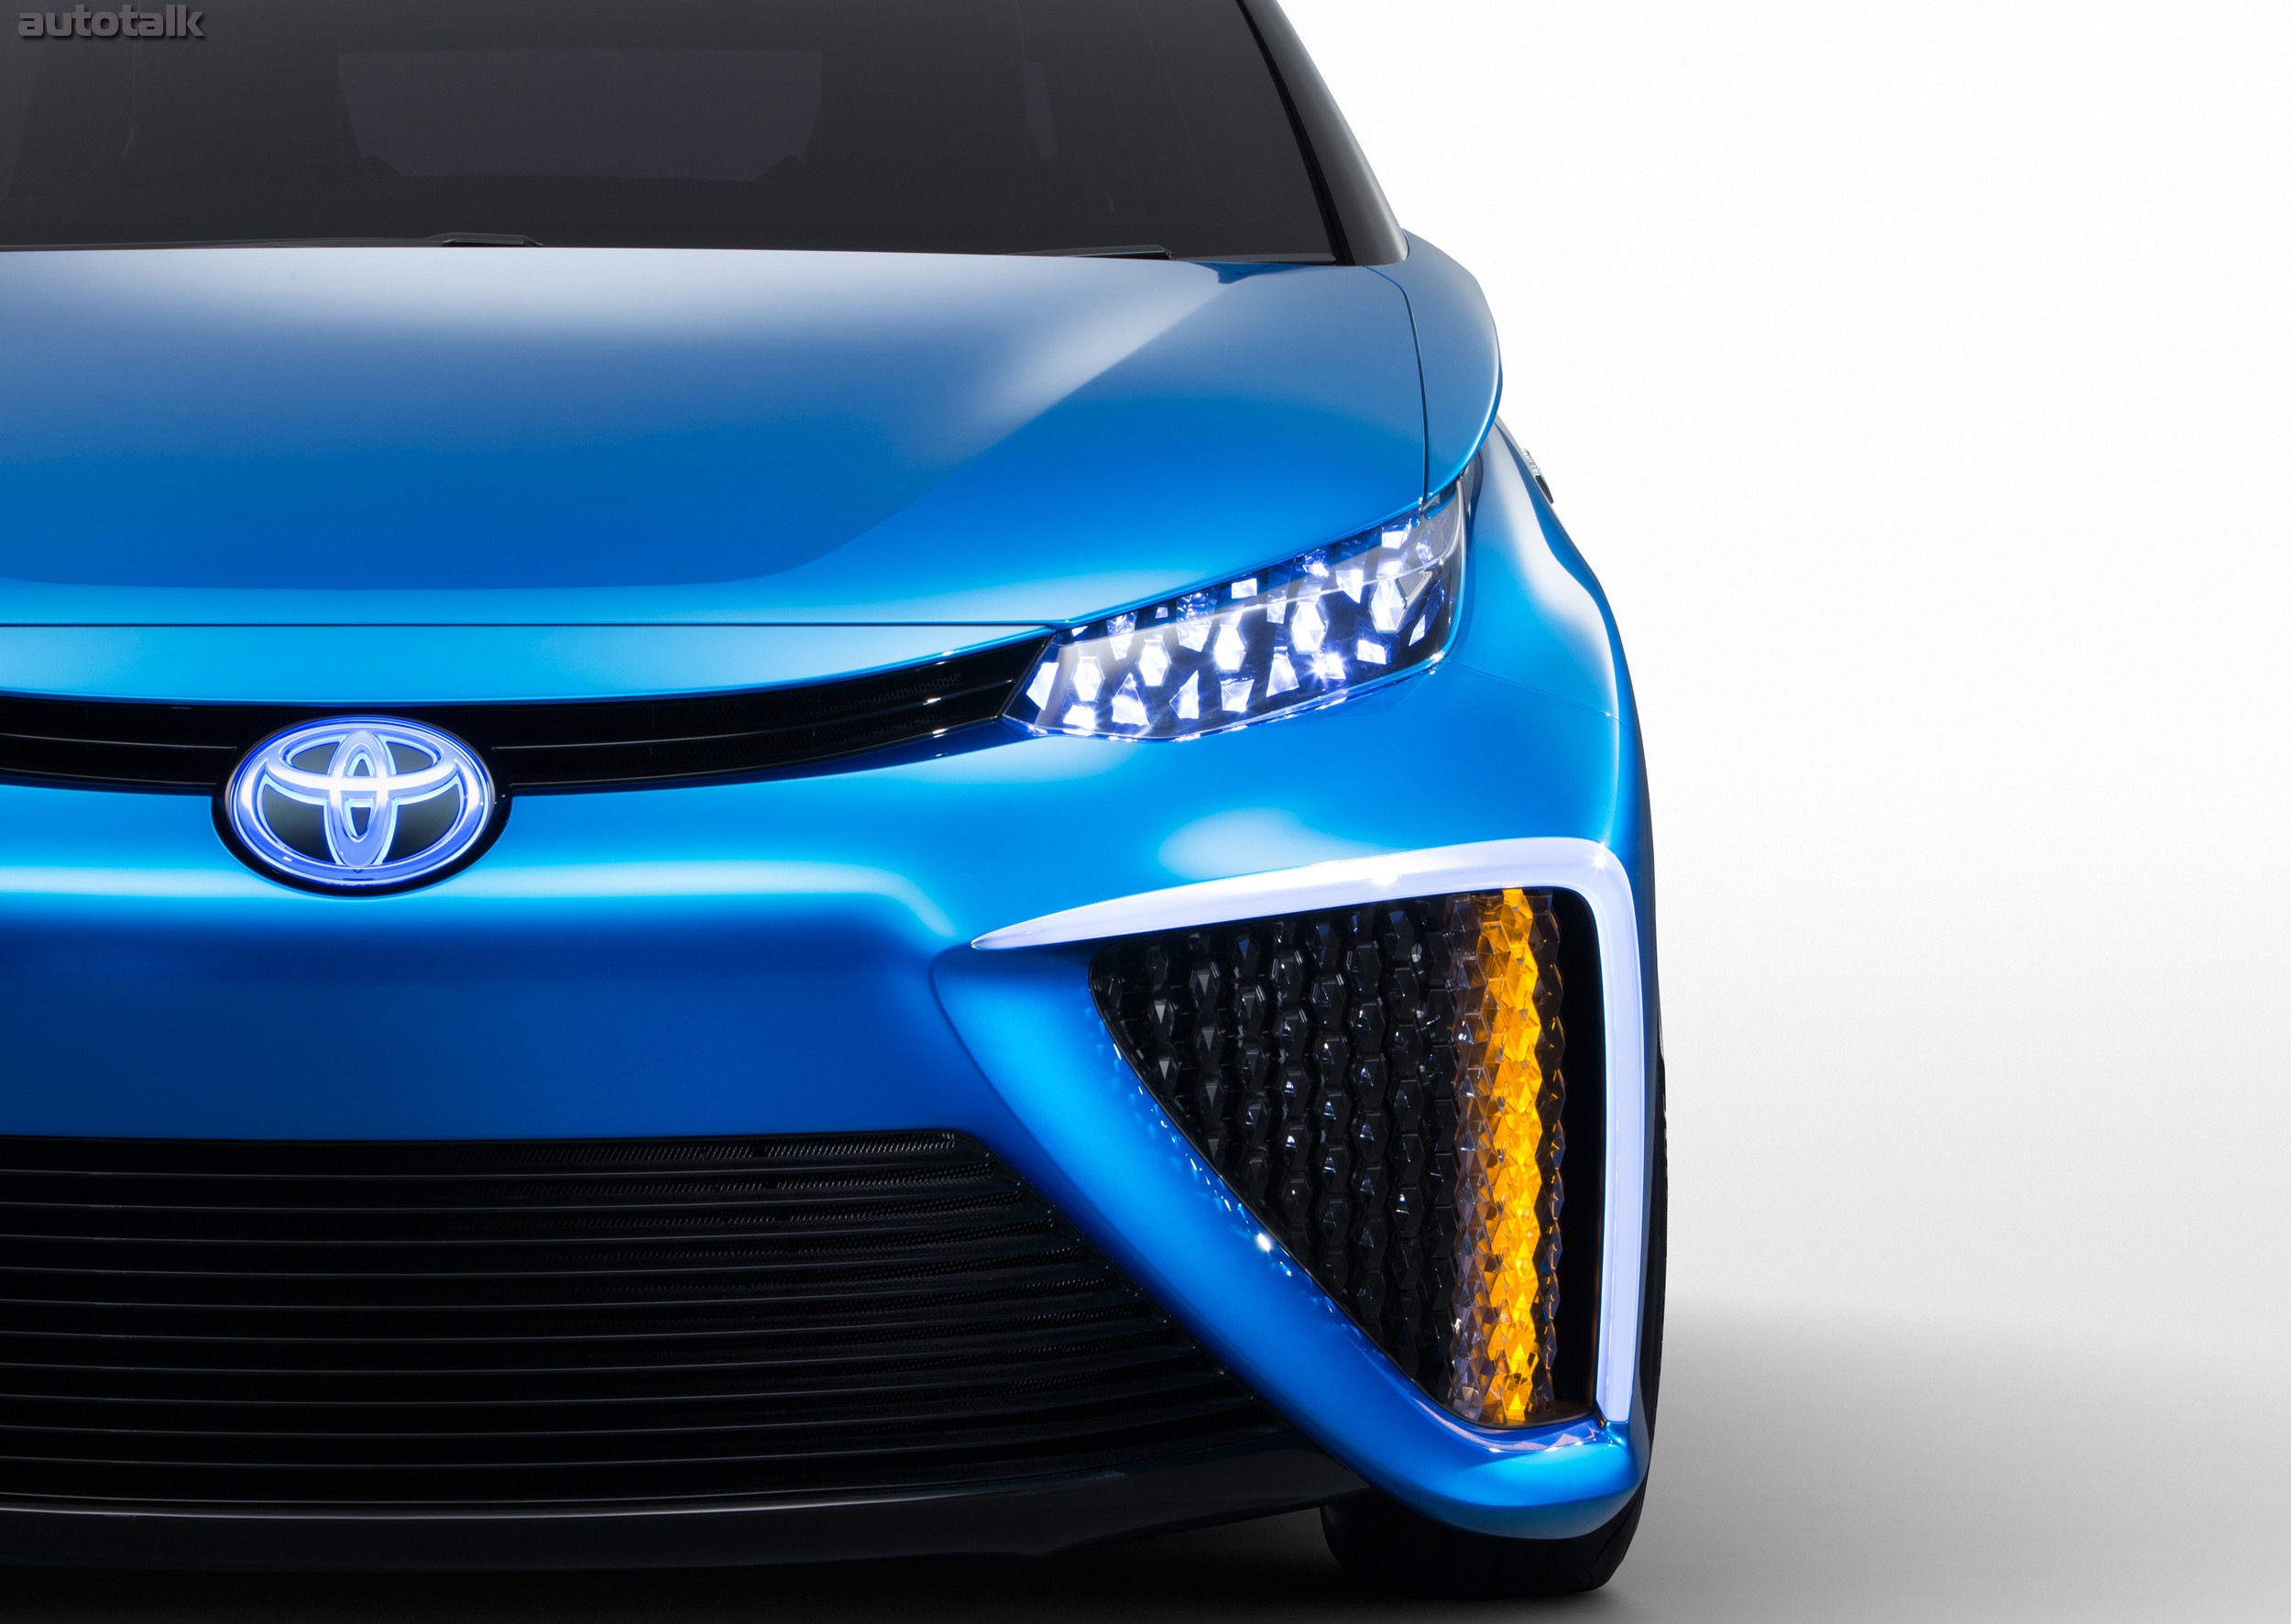 2014 Toyota Fuel Cell Vehicle Concept